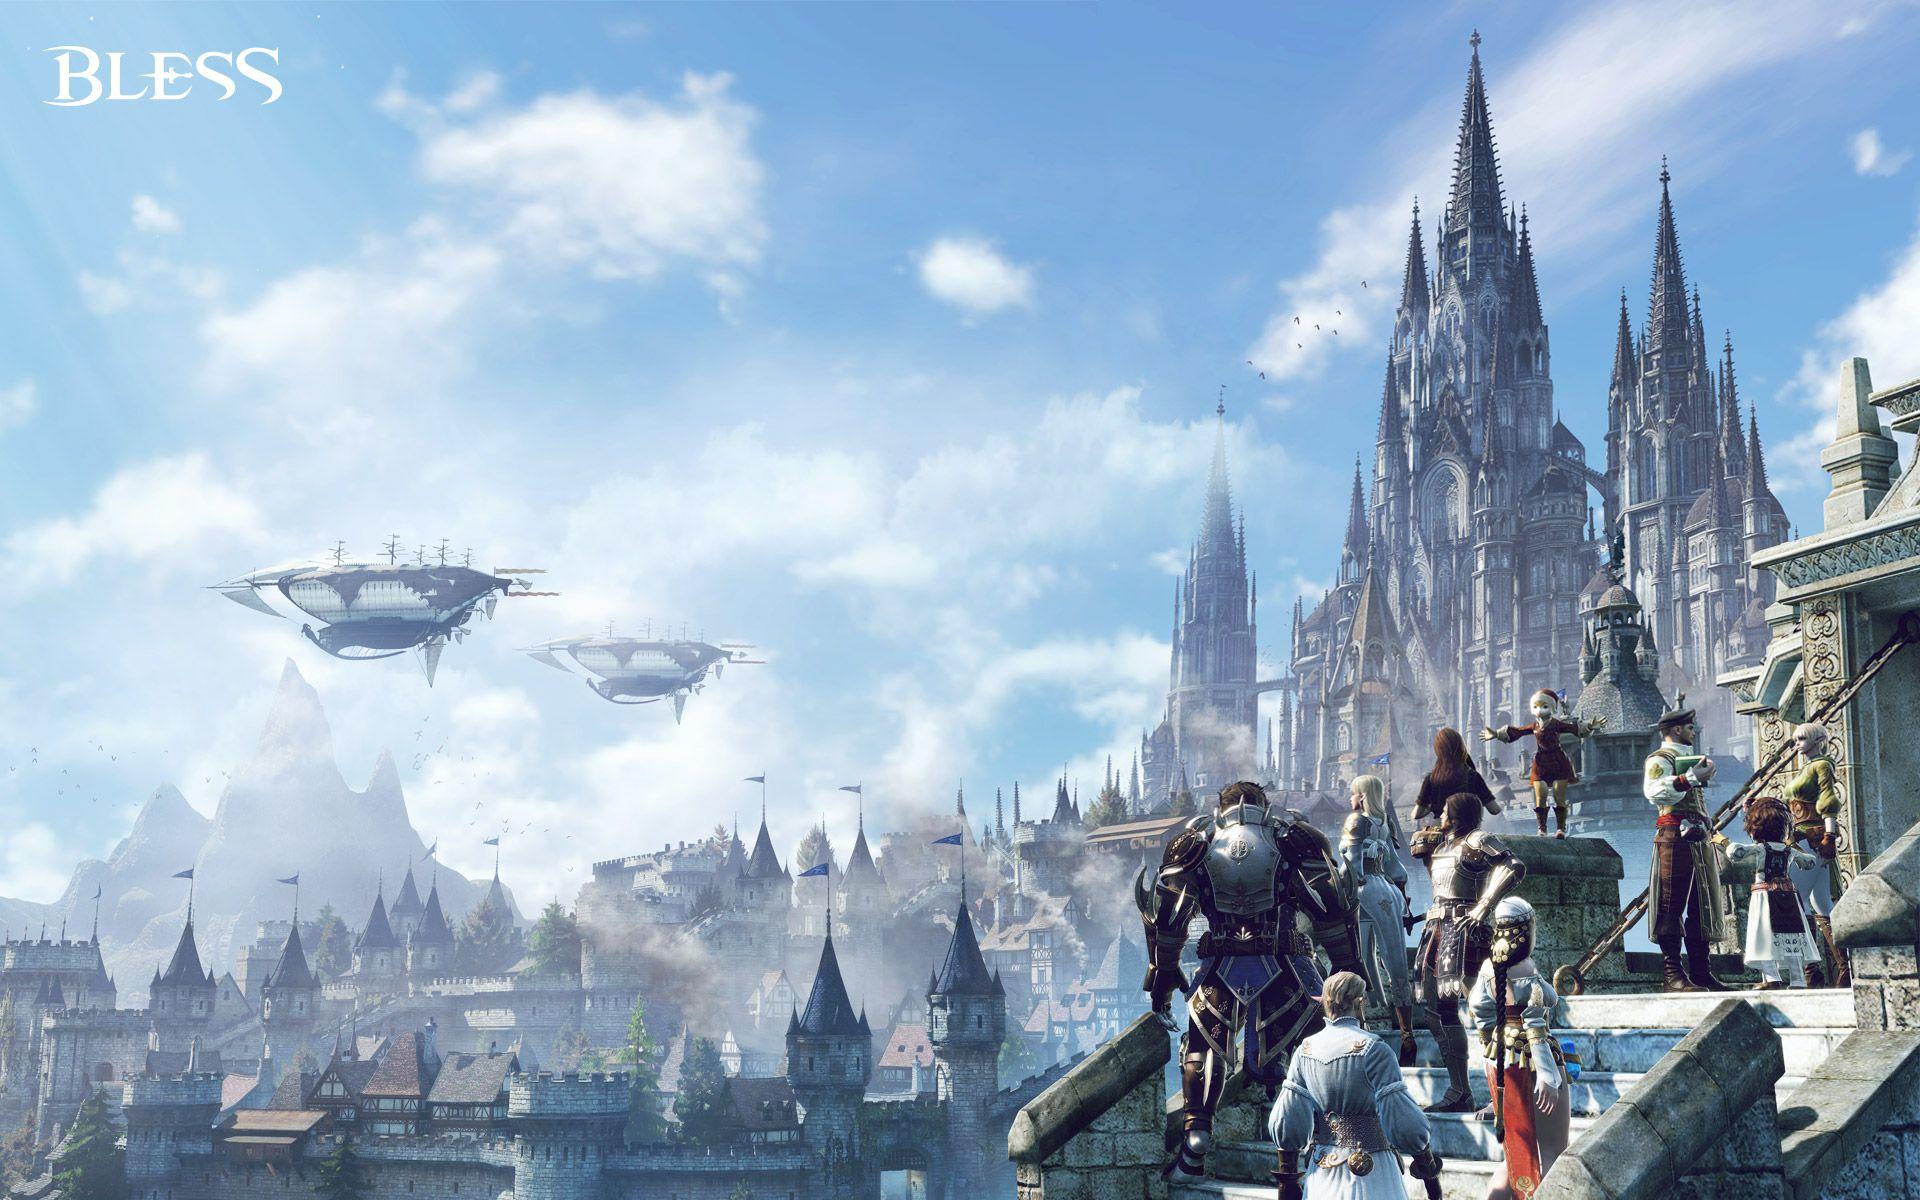 Bless Online best new PC MMORPG from Asia. A stunning Online